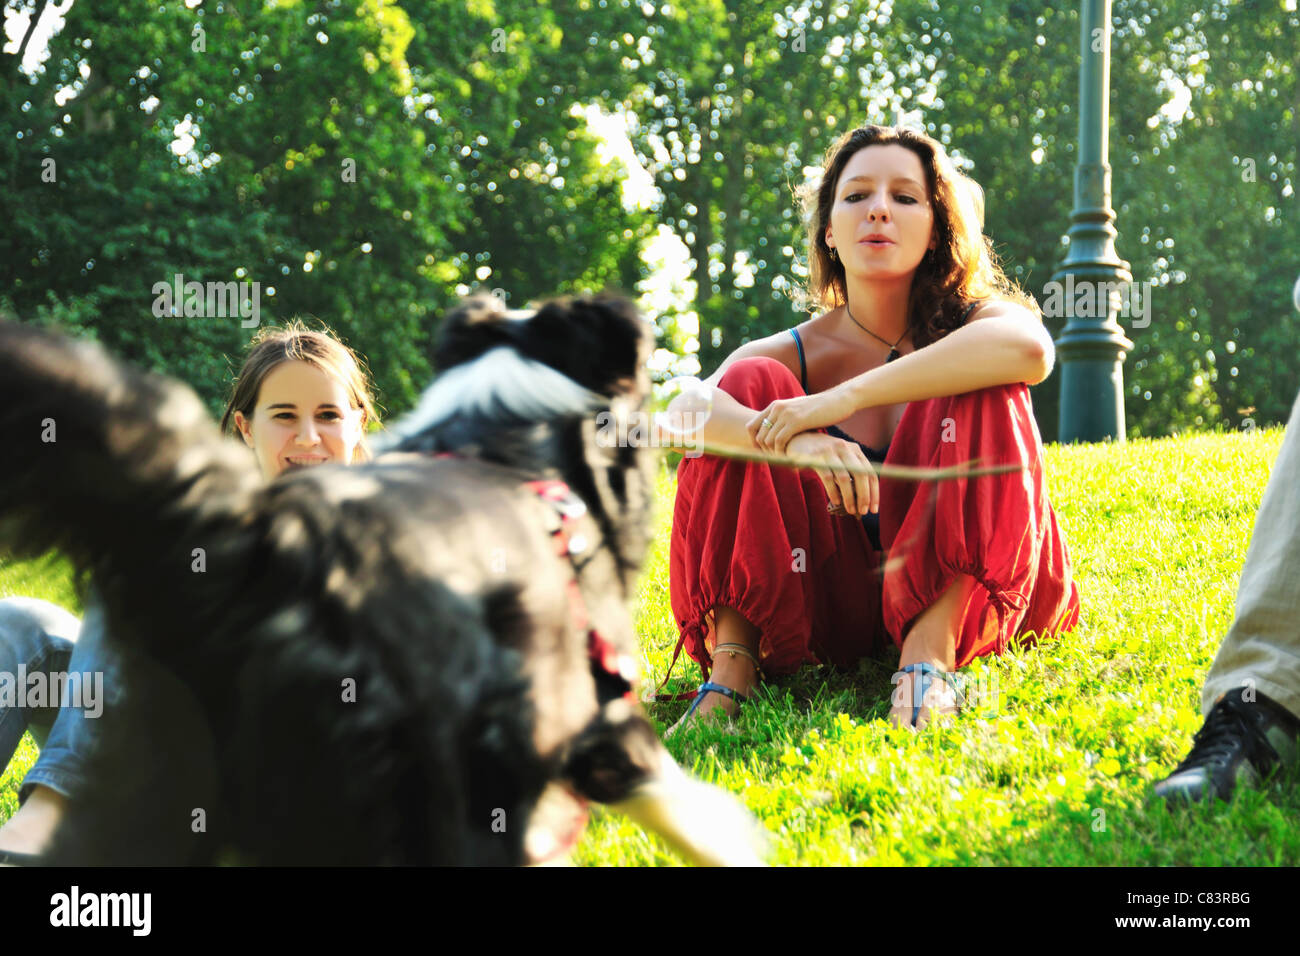 Woman playing with dog in park Stock Photo